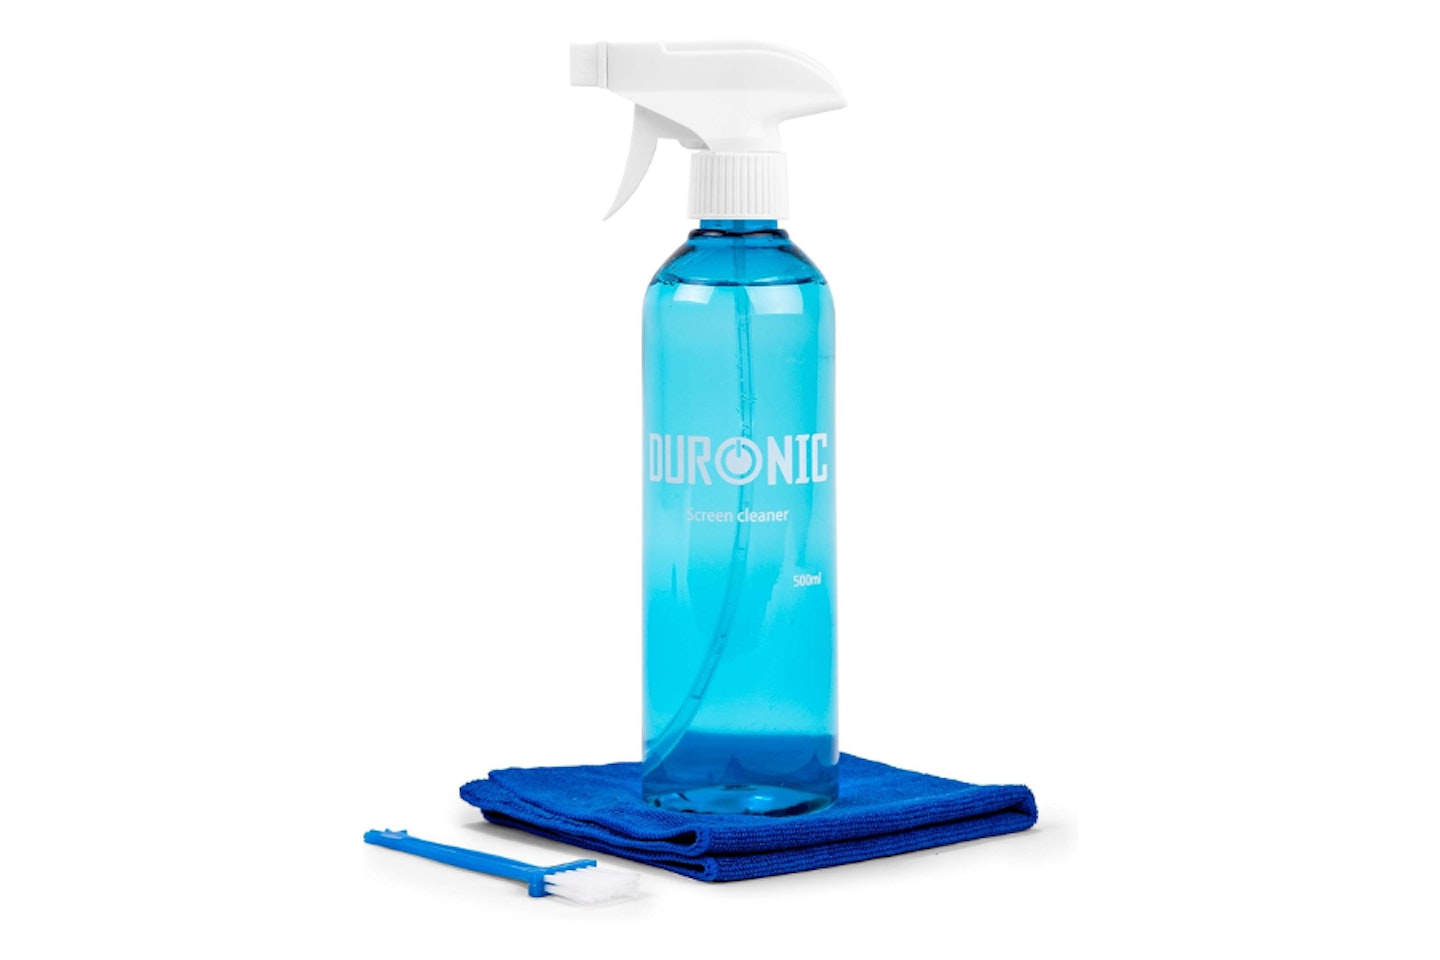 Duronic Screen Cleaner Kit With Microfibre Cloth - one of the best TV screen cleaner products